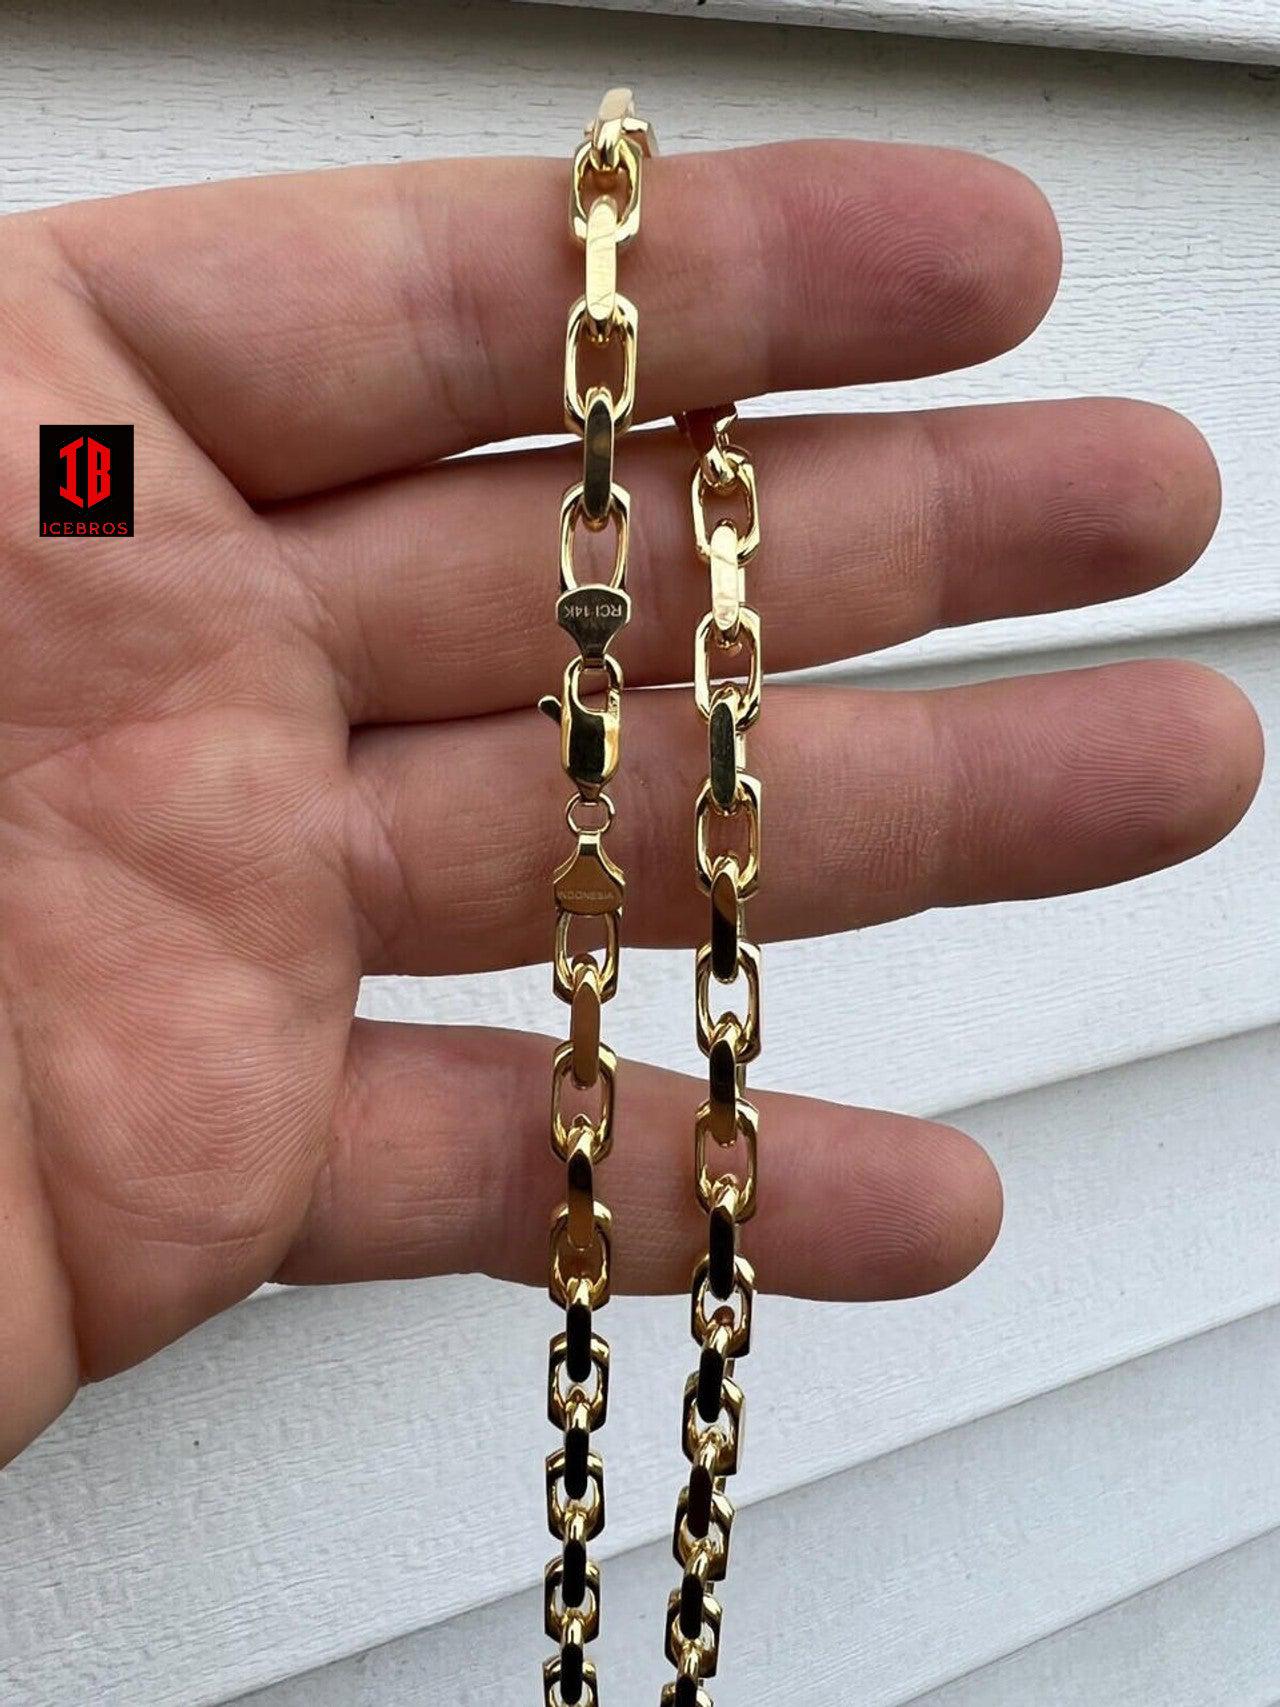 14k Real Solid Yellow Gold Rolo Hermes Link Chain Necklace HEAVY Link 5mm